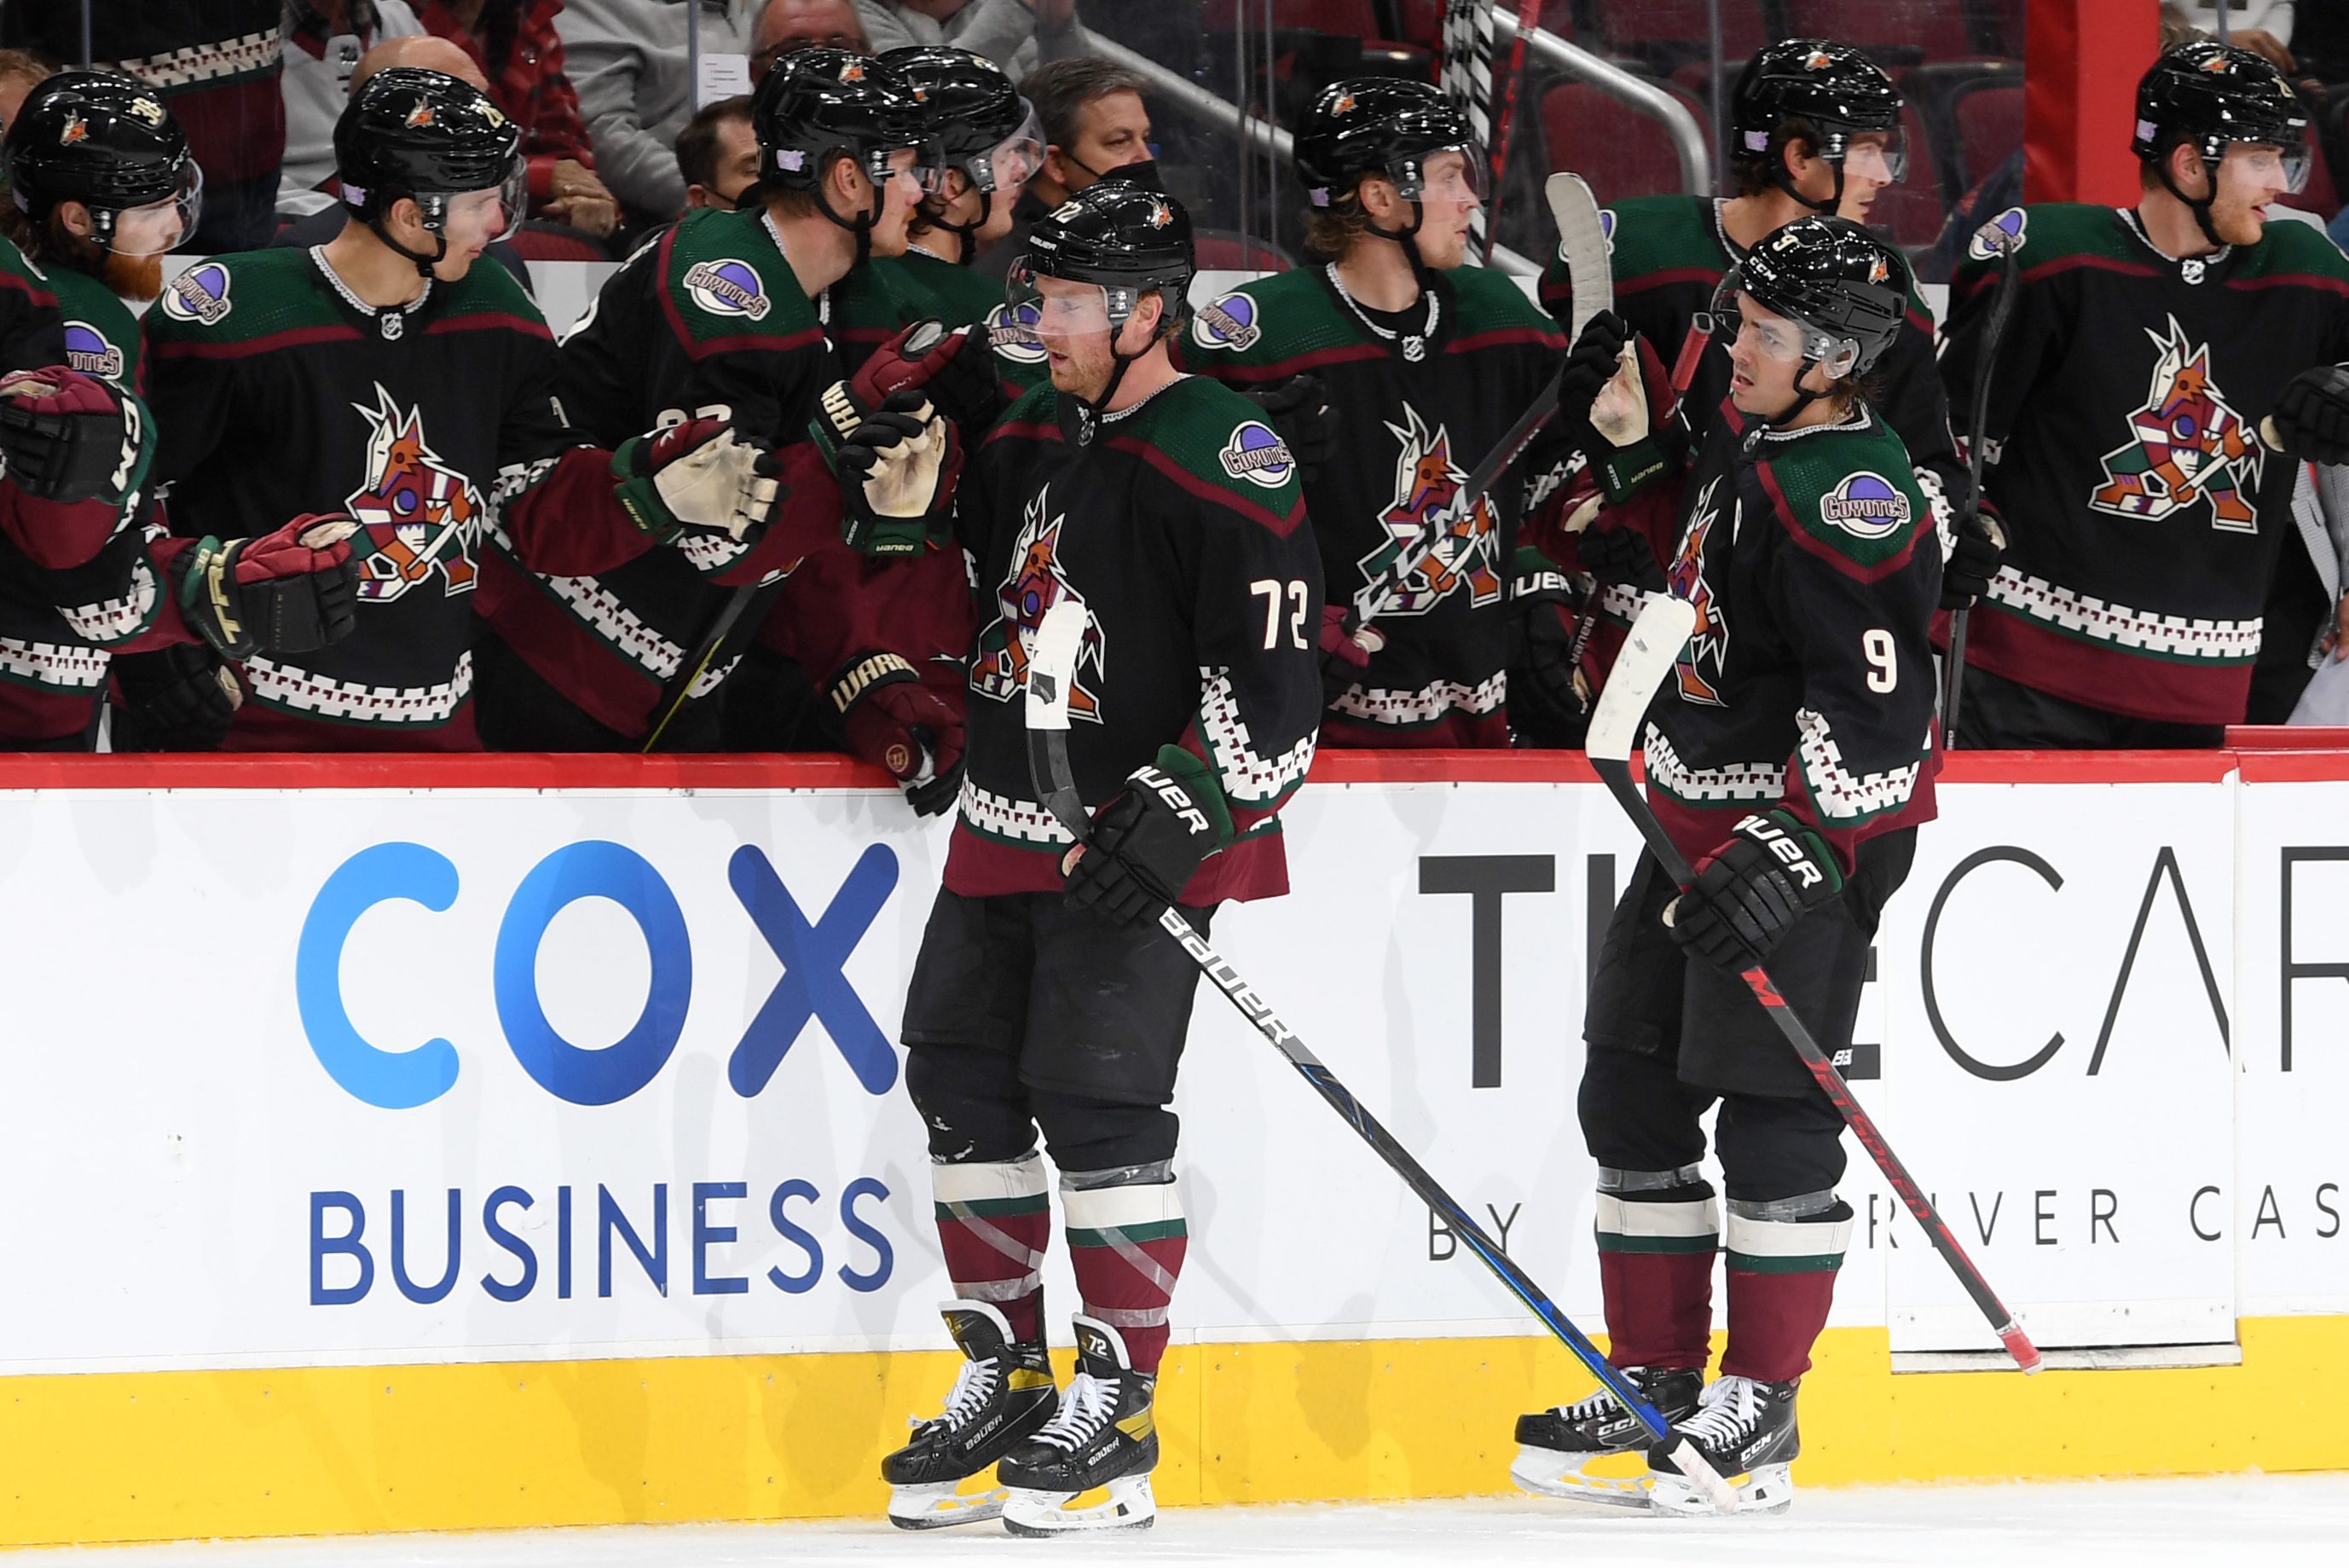 Arizona Coyotes Confirm Another Year at Gila River Arena